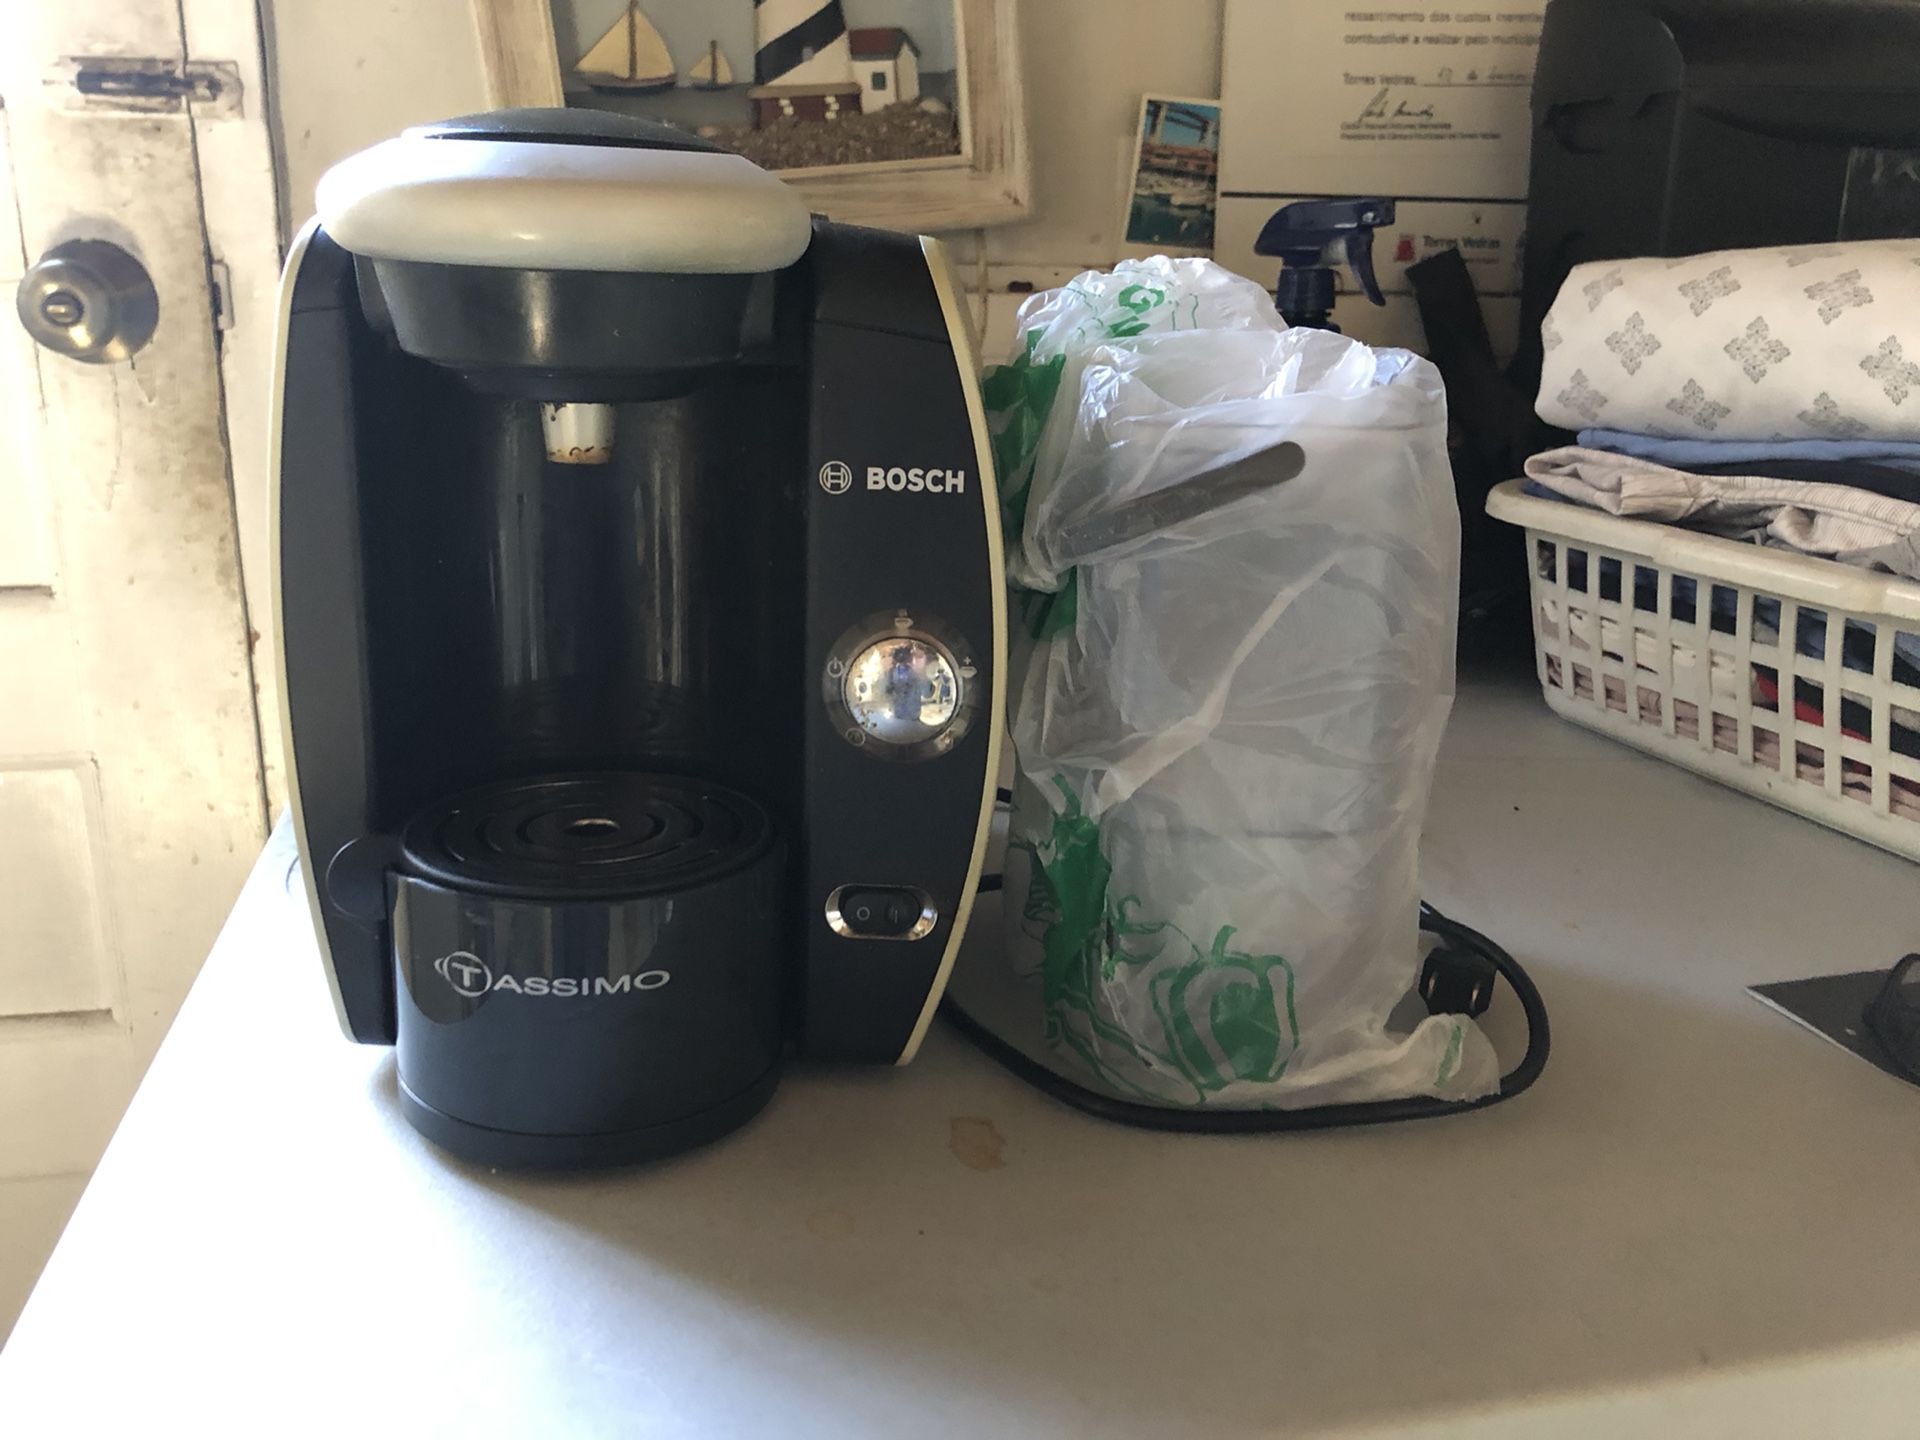  Bosch Tassimo Coffee & Espresso Maker T45 Single Cup T-Disc TAS4511UC/01 Silver. Coffee machine has been tested and works. Comes with two new mavea w